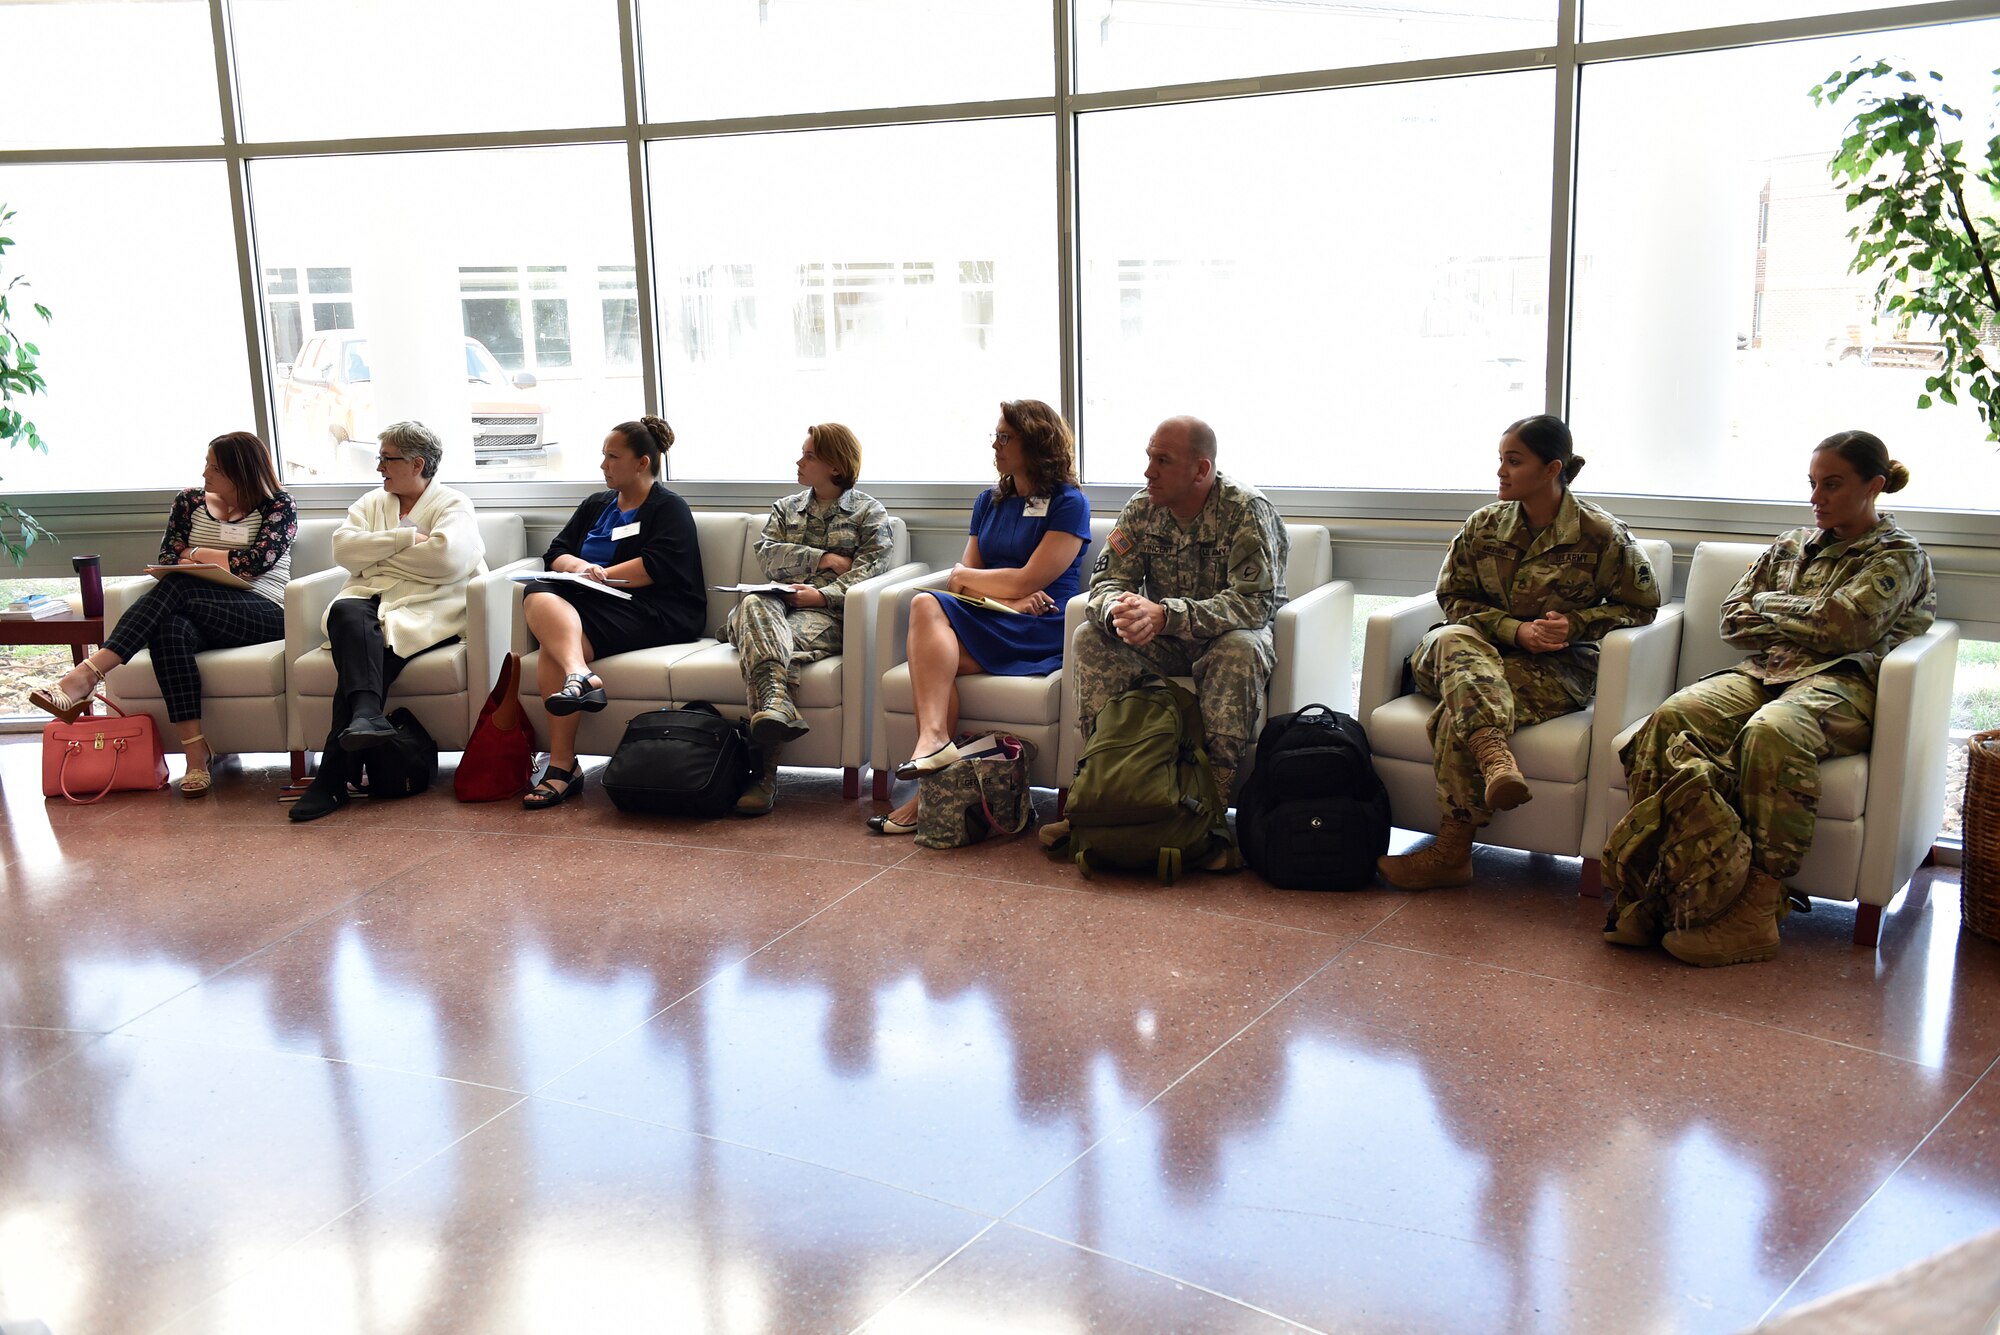 National Guard Soldiers and civilians assigned to general officers attend a networking breakout Aug. 30, 2016, during the General Officer Support Staff Course at the I.G. Brown Training and Education Center on McGhee Tyson Air National Guard Base in Louisville, Tenn. (U.S. Air National Guard photo by Master Sgt. Mike R. Smith)